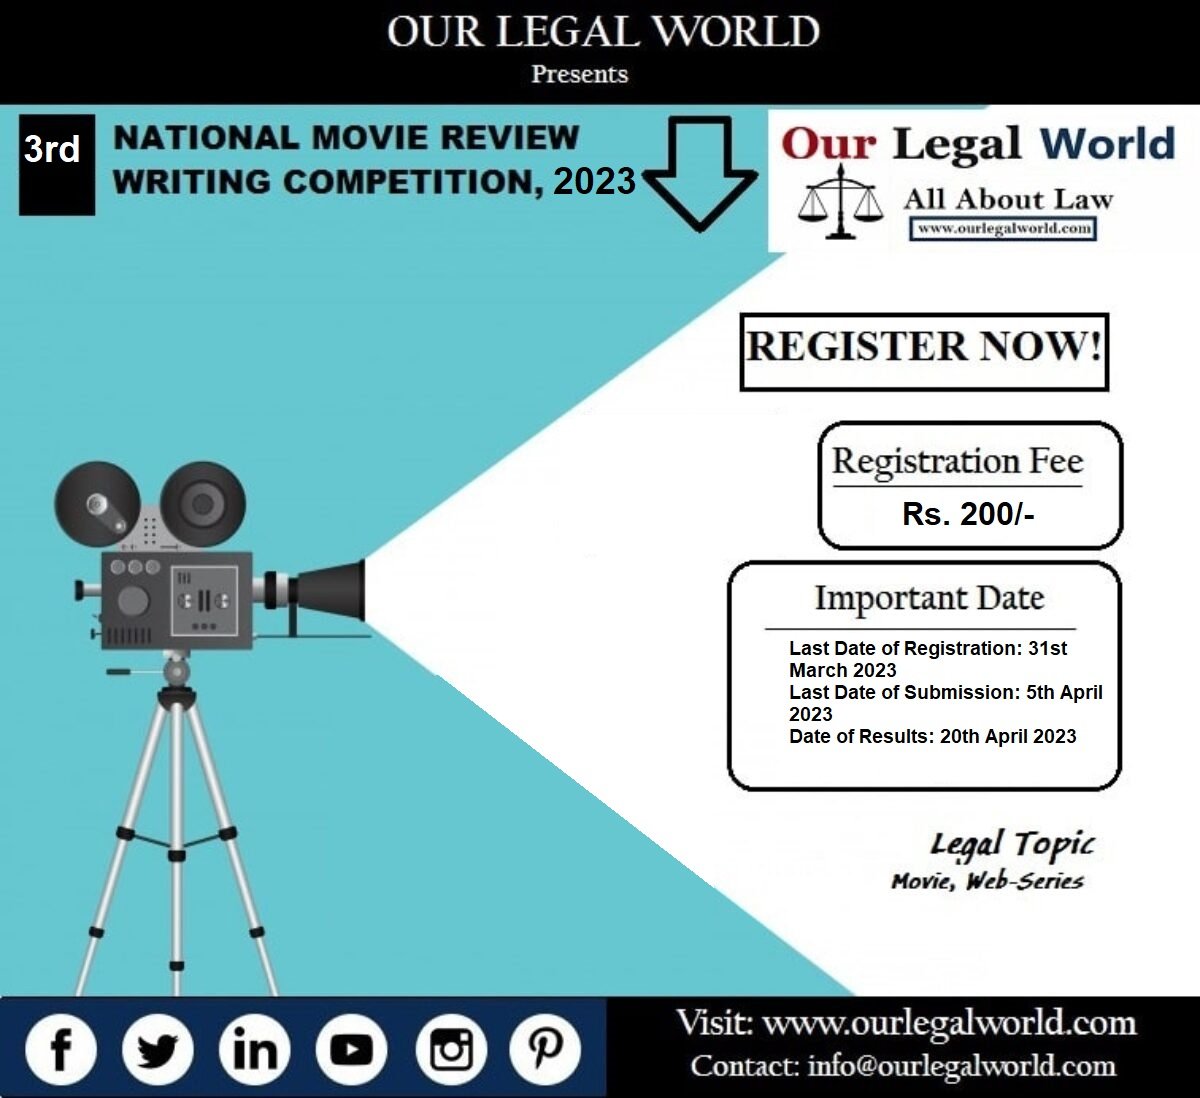 OurLegalWorld is organizing the 3rd edition of the Movie Review writing competition in the month of April 2023 on the topic of Law and Film